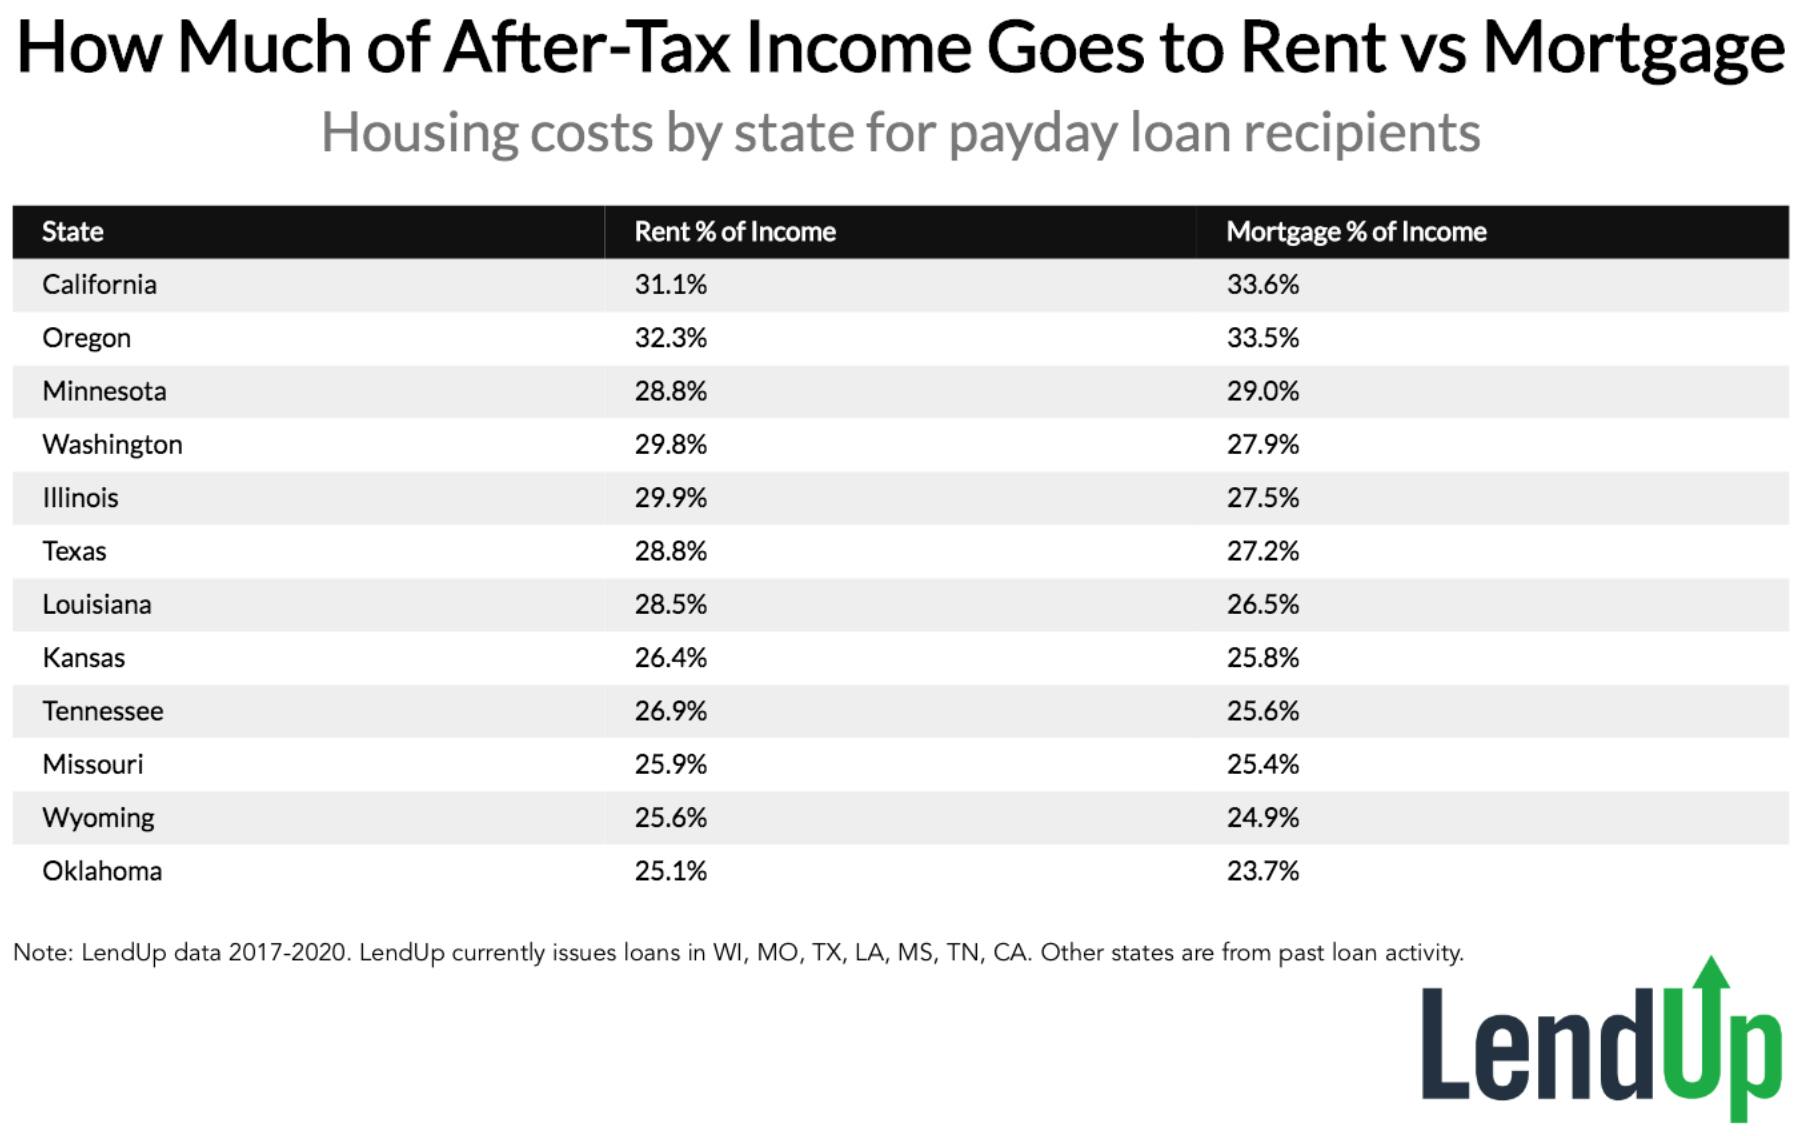 How Much of After-Tax Income Goes to Rent vs Mortgage